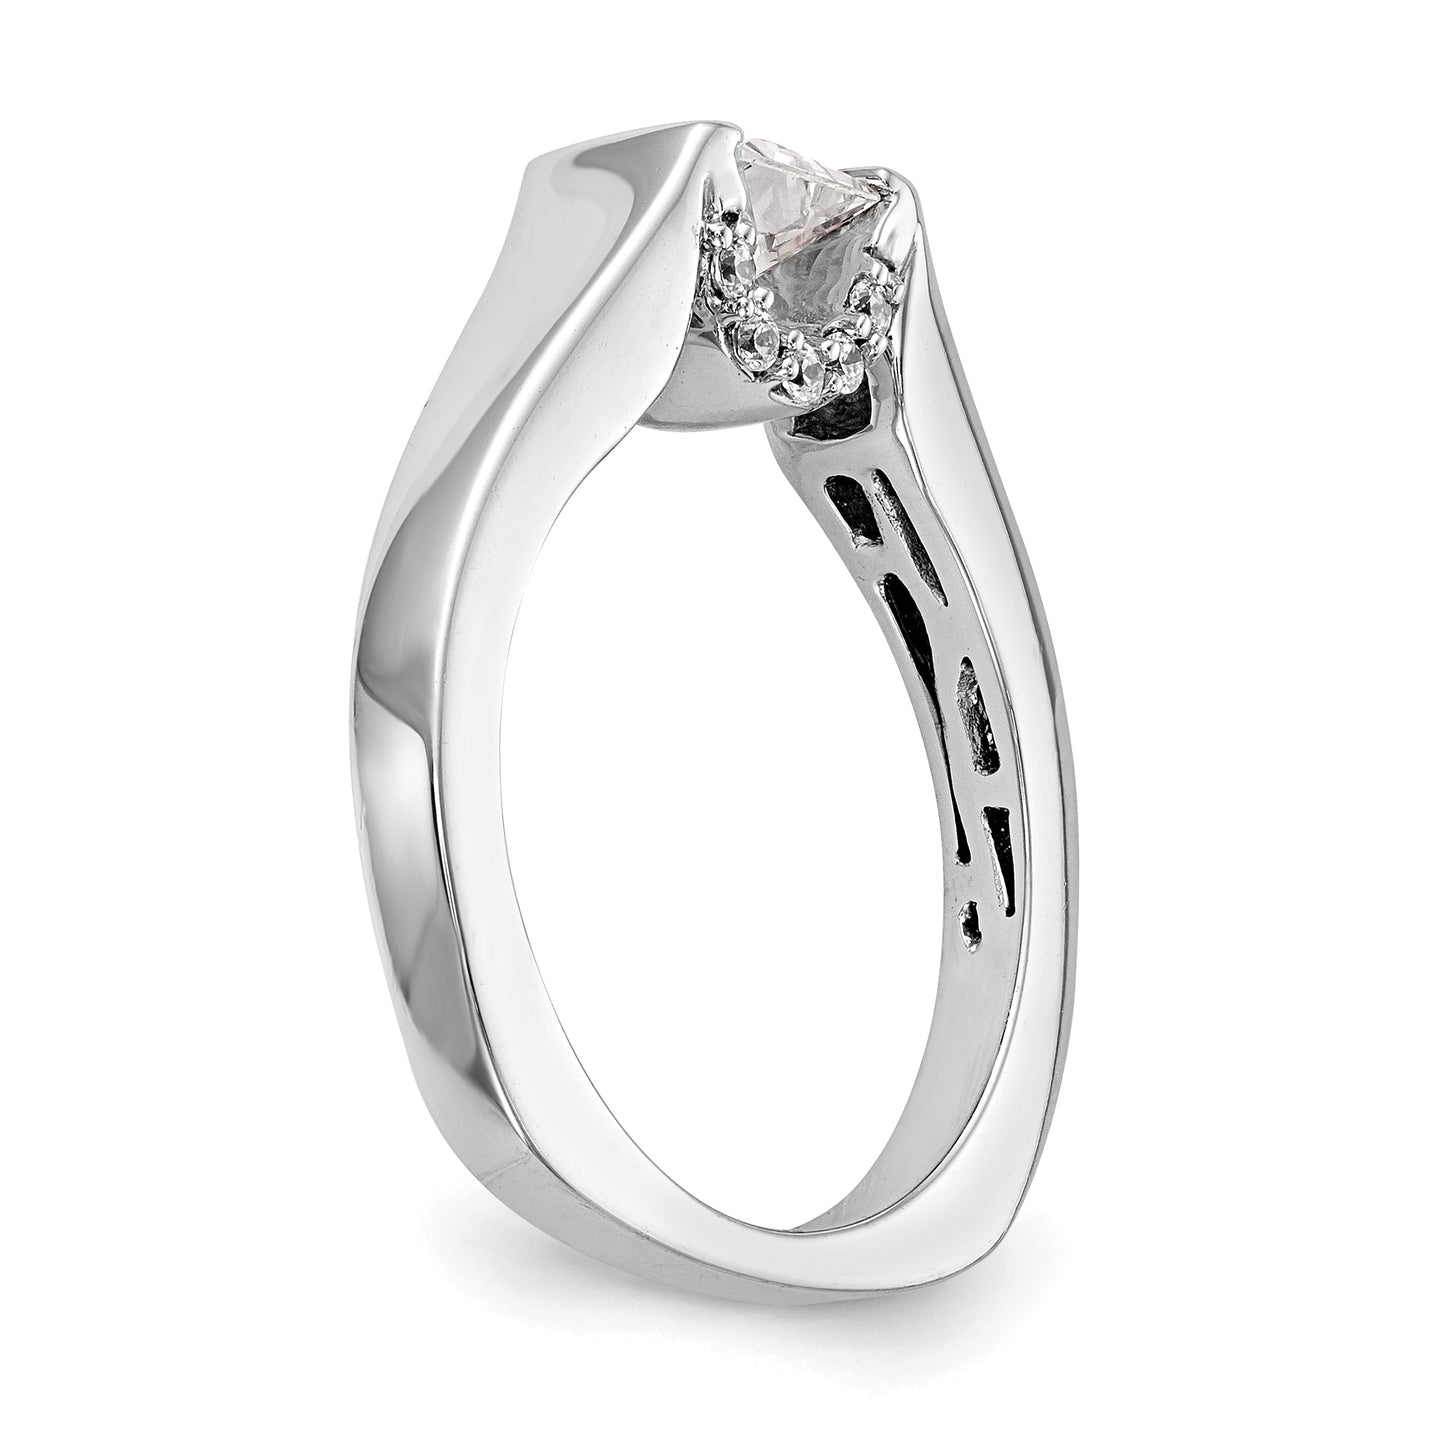 14k White Gold Square Simulated Diamond Engagement Ring